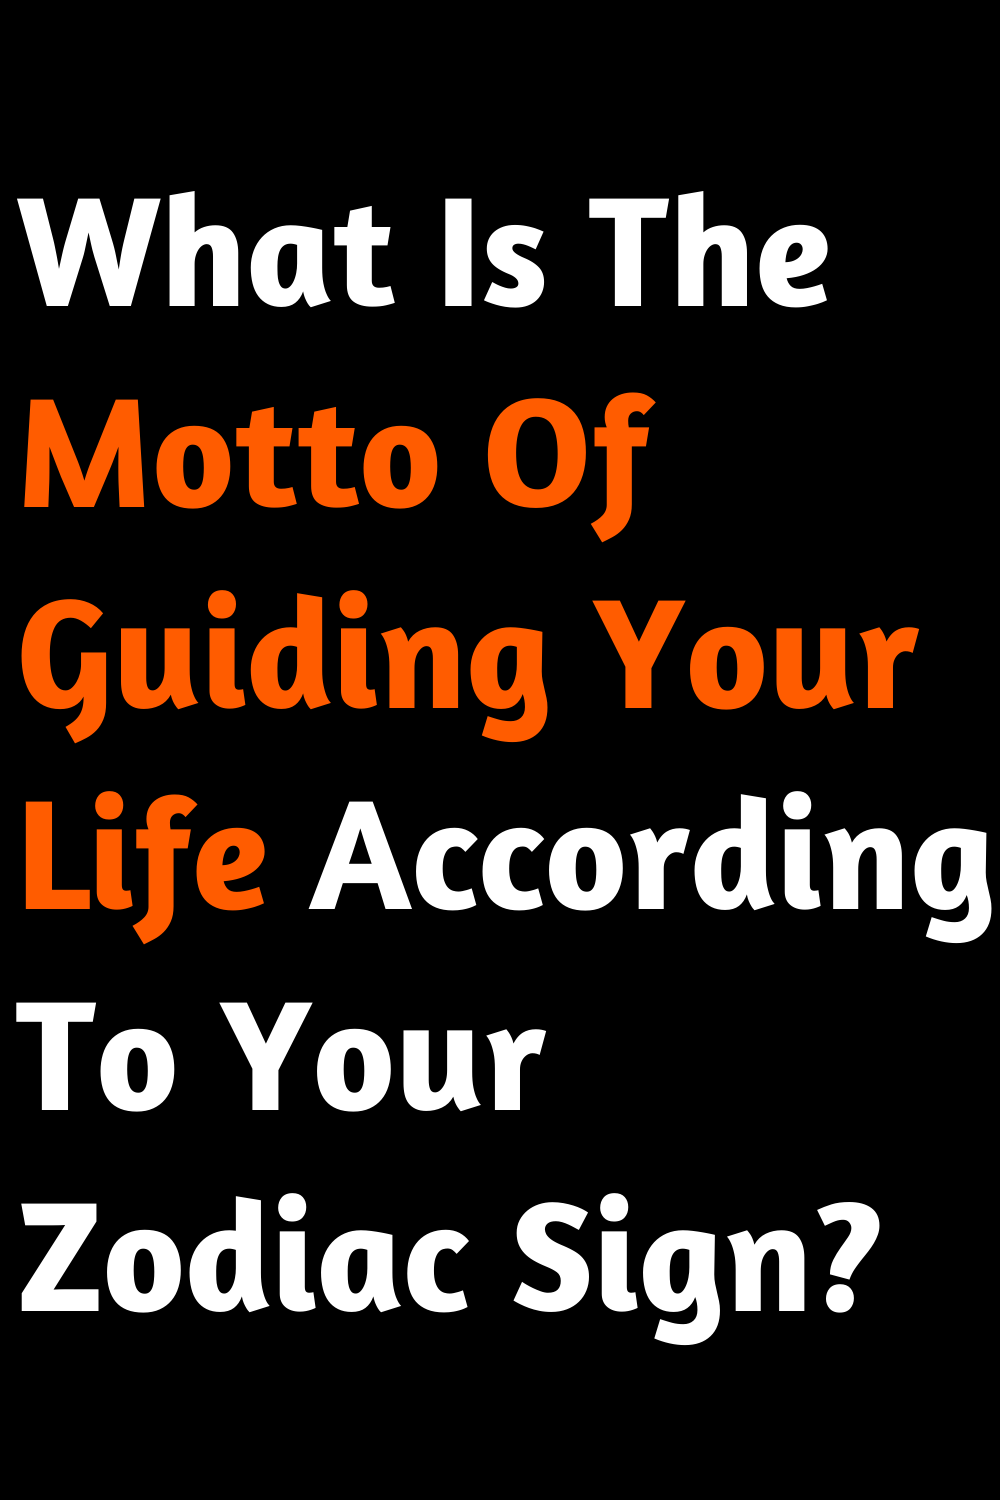 What Is The Motto Of Guiding Your Life According To Your Zodiac Sign?